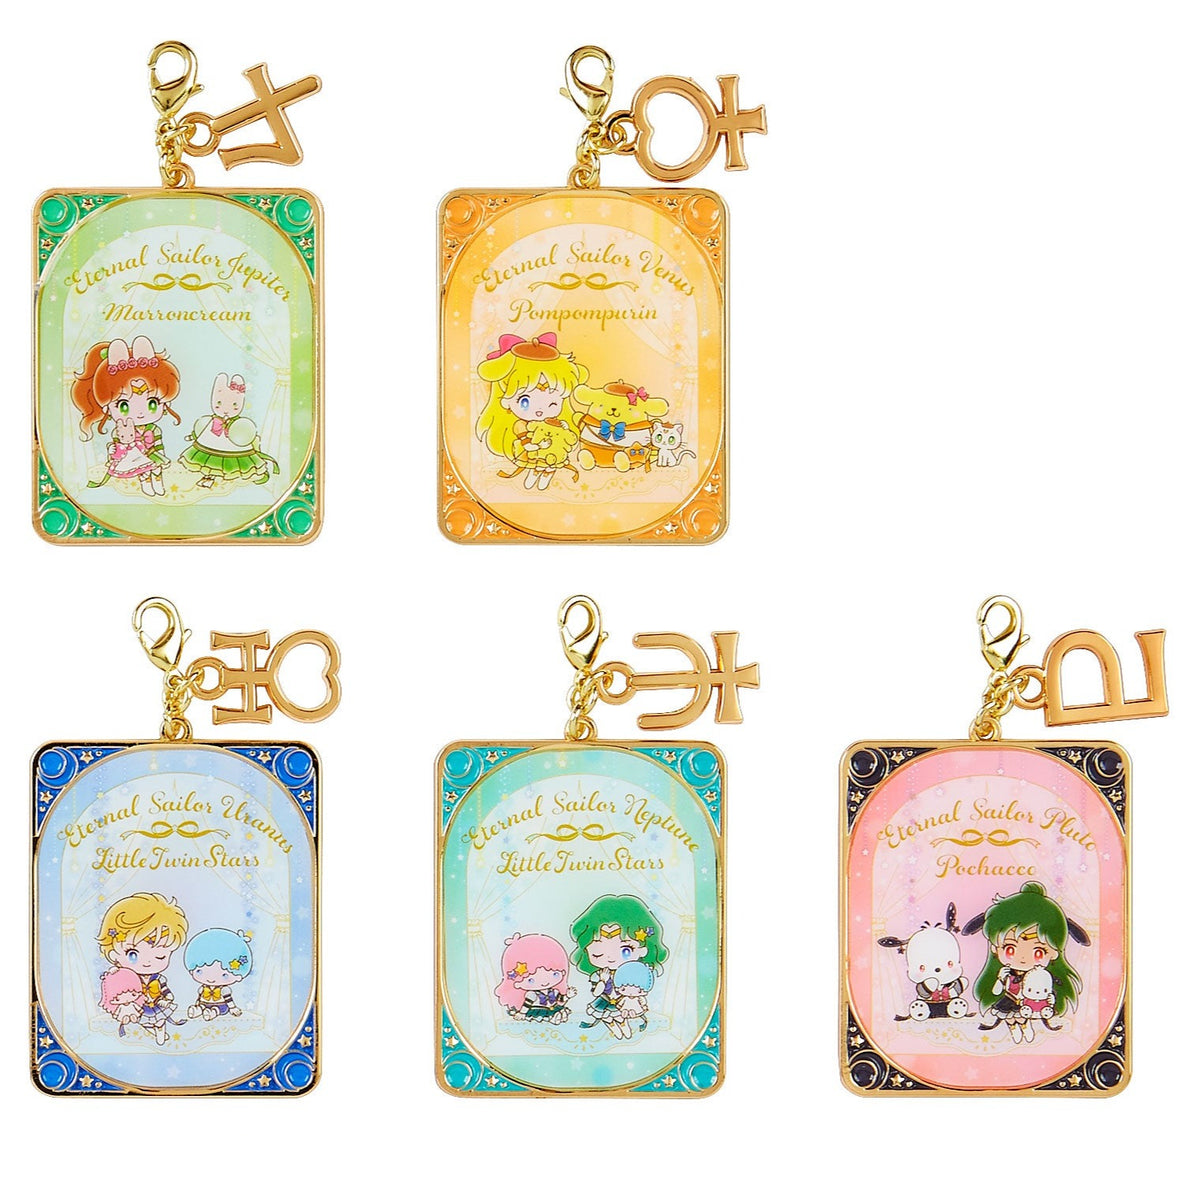 Sailor Moon Store Exclusive Candy Charms